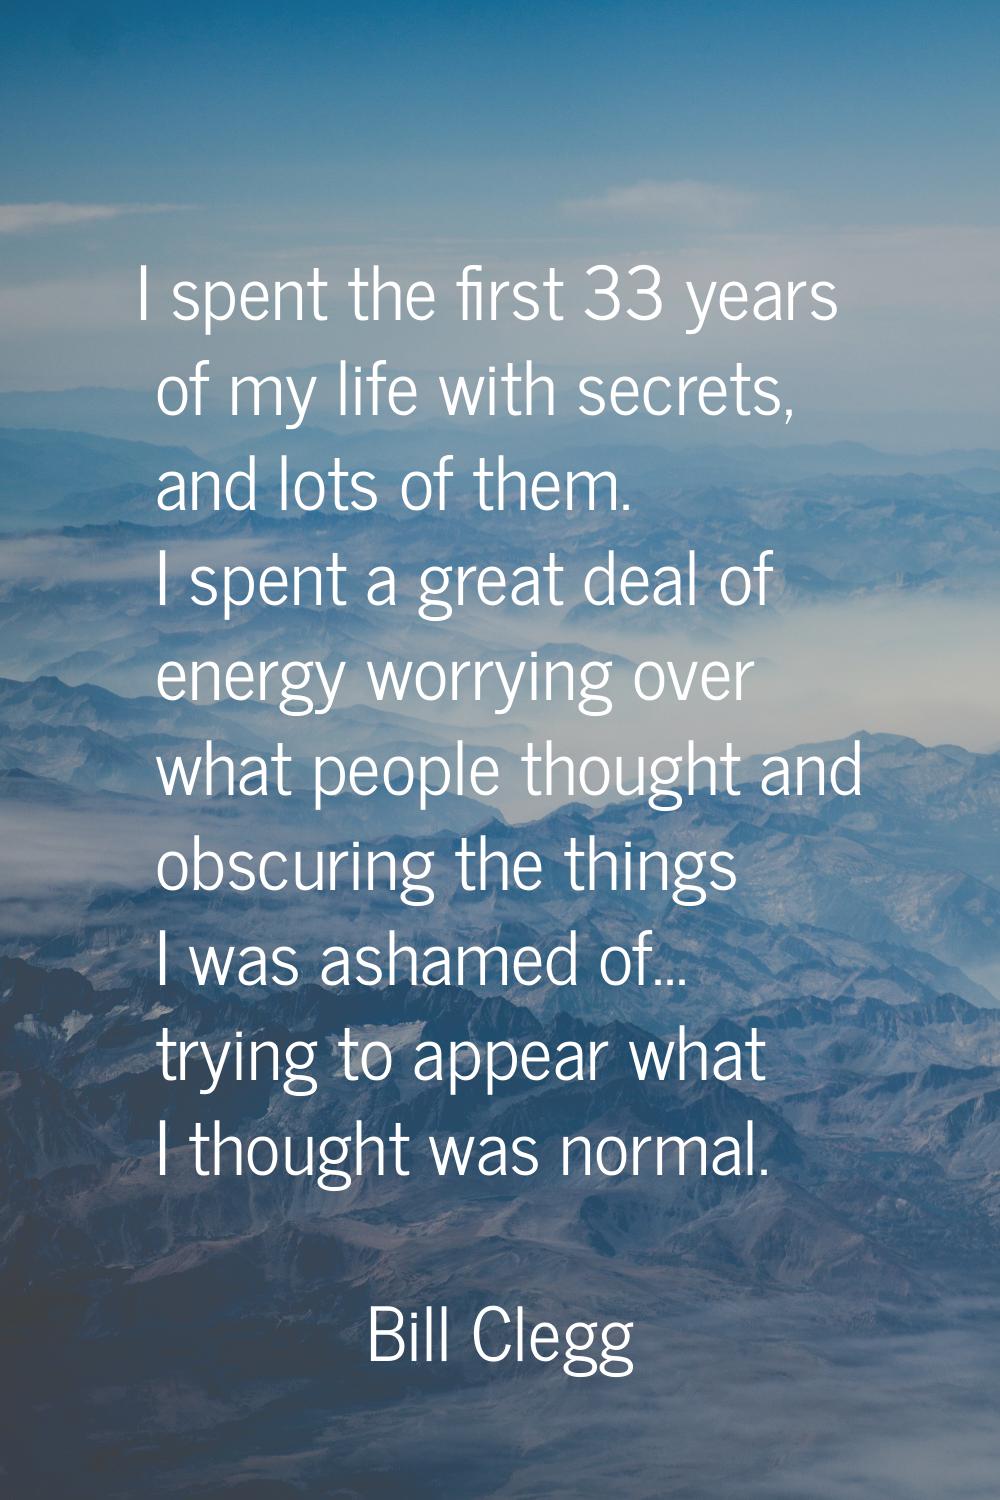 I spent the first 33 years of my life with secrets, and lots of them. I spent a great deal of energ